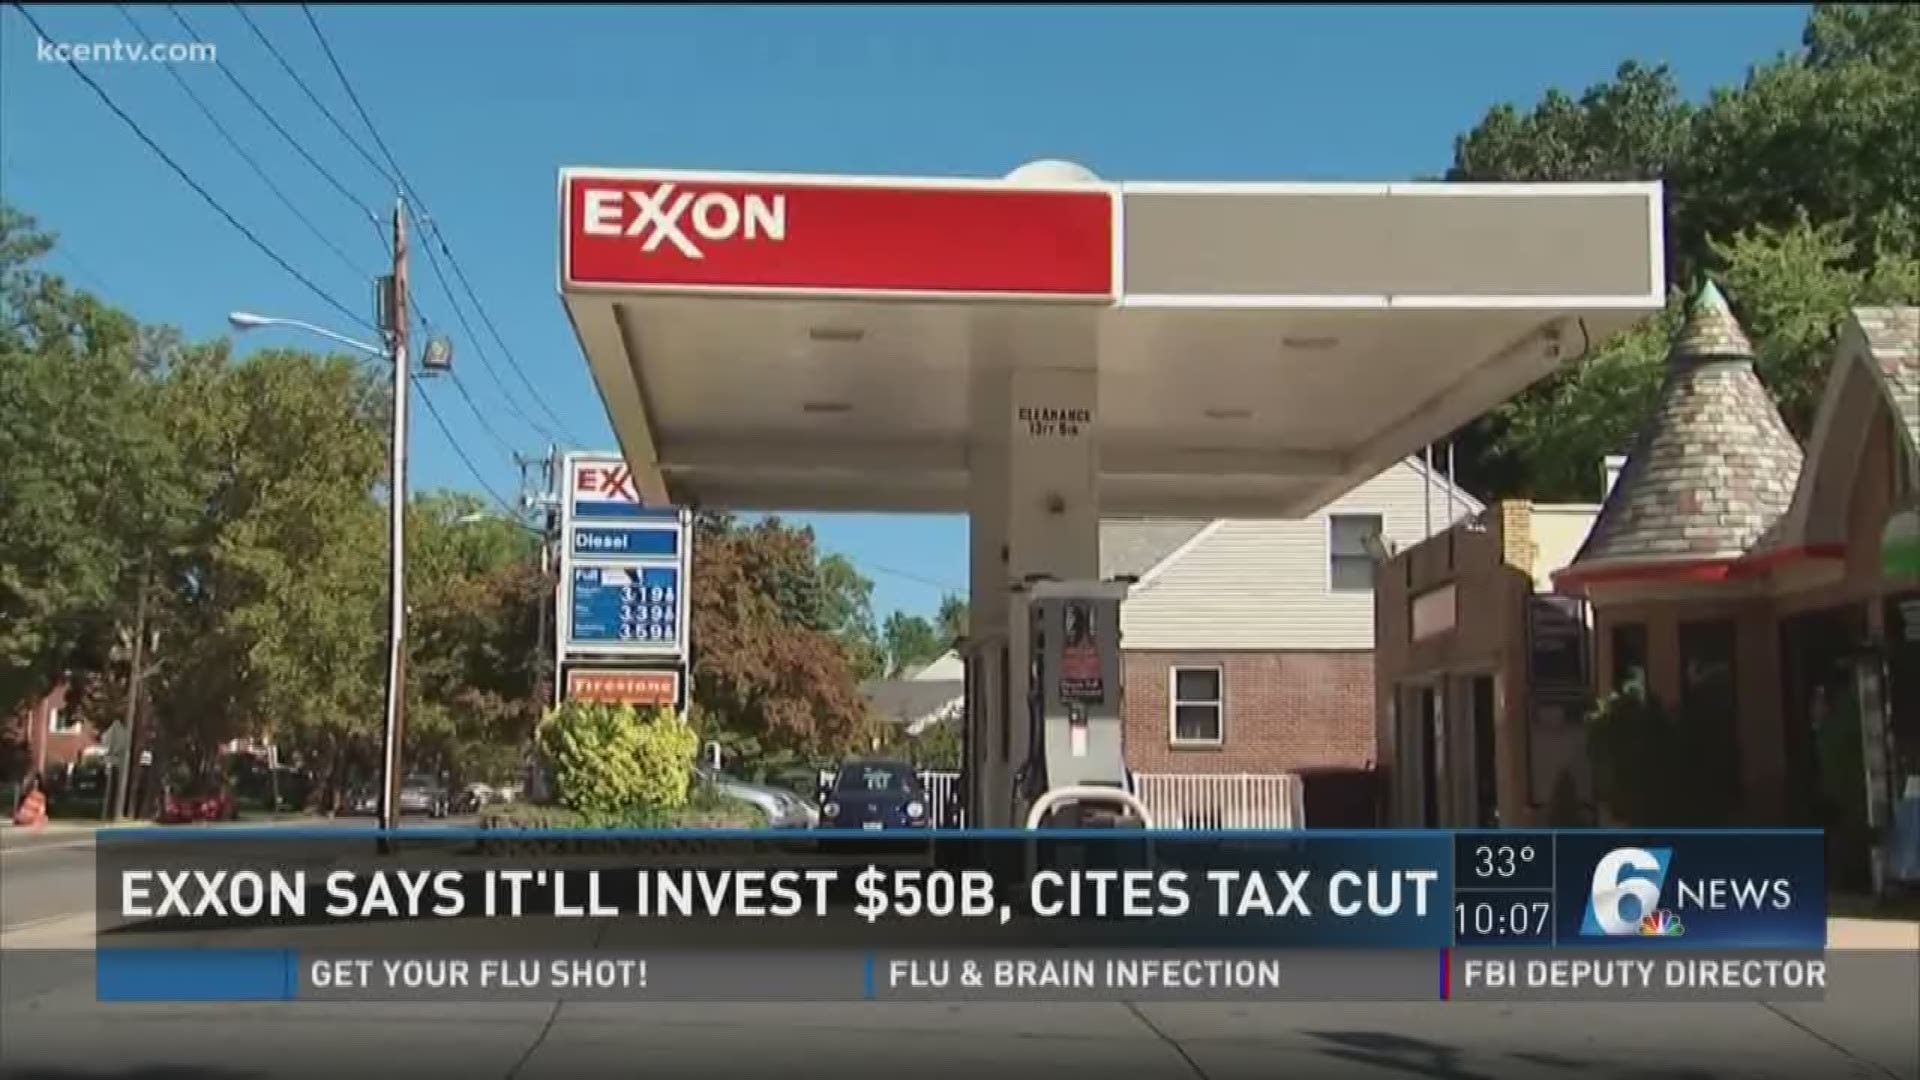 Exxon's CEO said the oil company will invest more than $50 billion dollars over the next five years to expand its business in the U.S.